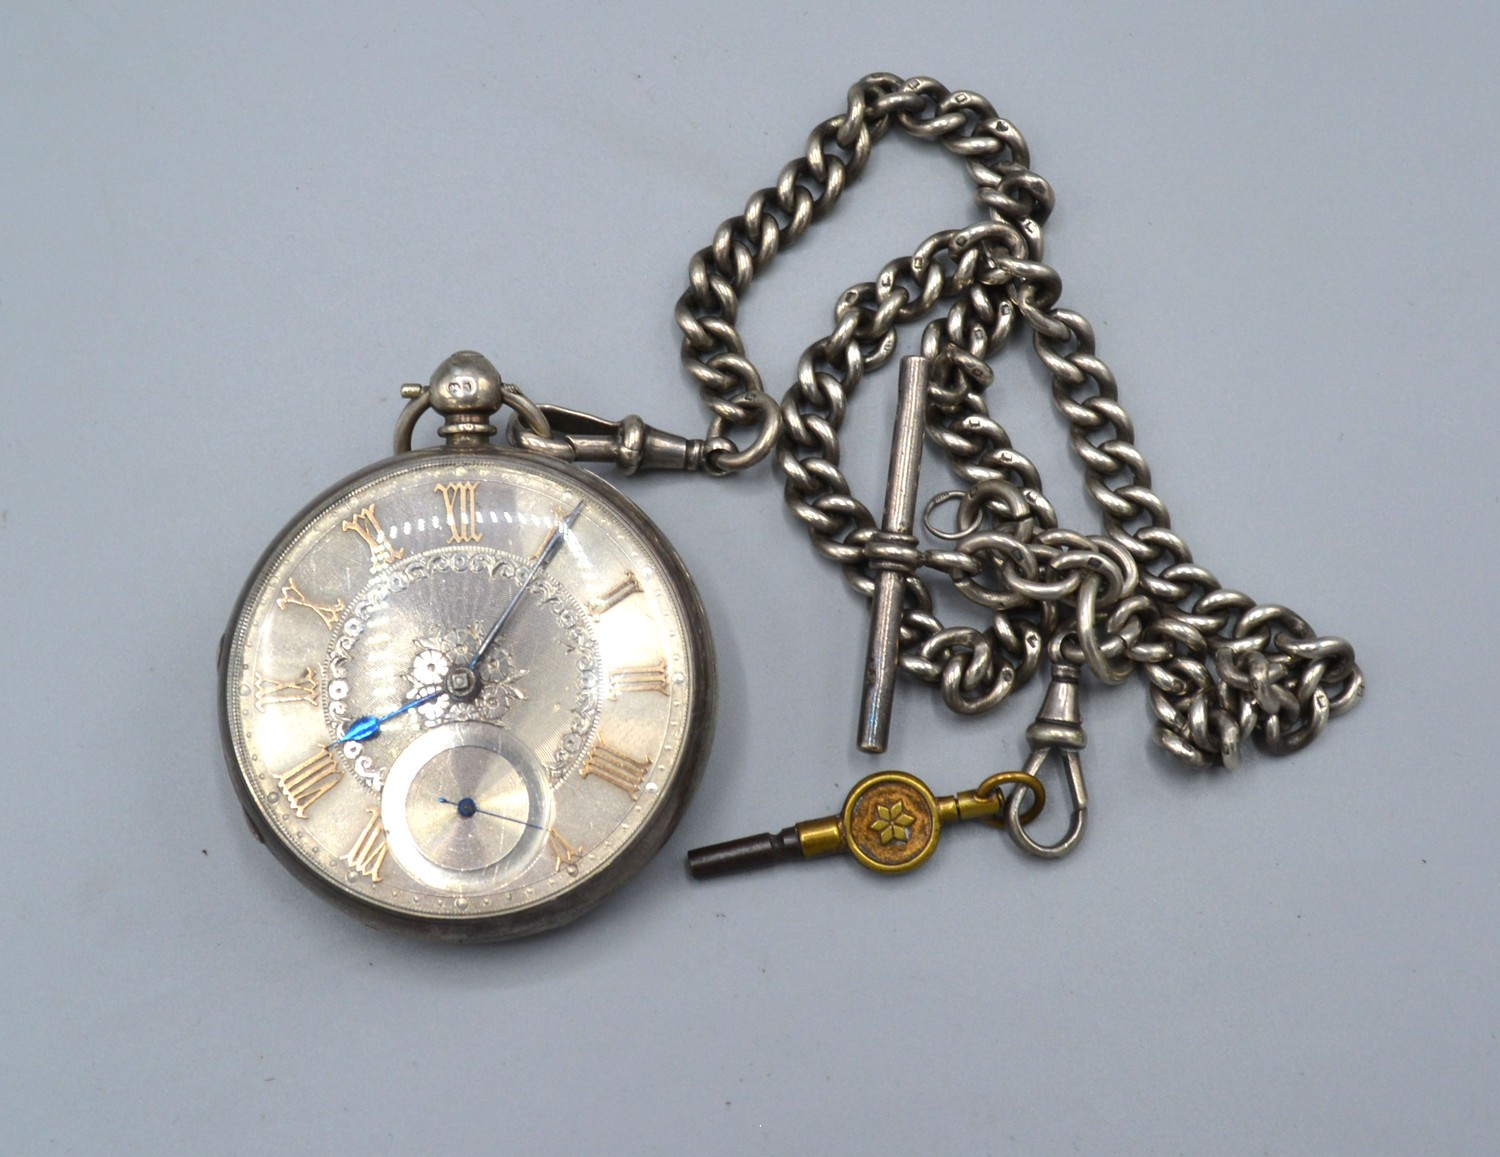 A London silver cased pocket watch, the engraved dial with Roman numerals and with curb link watch